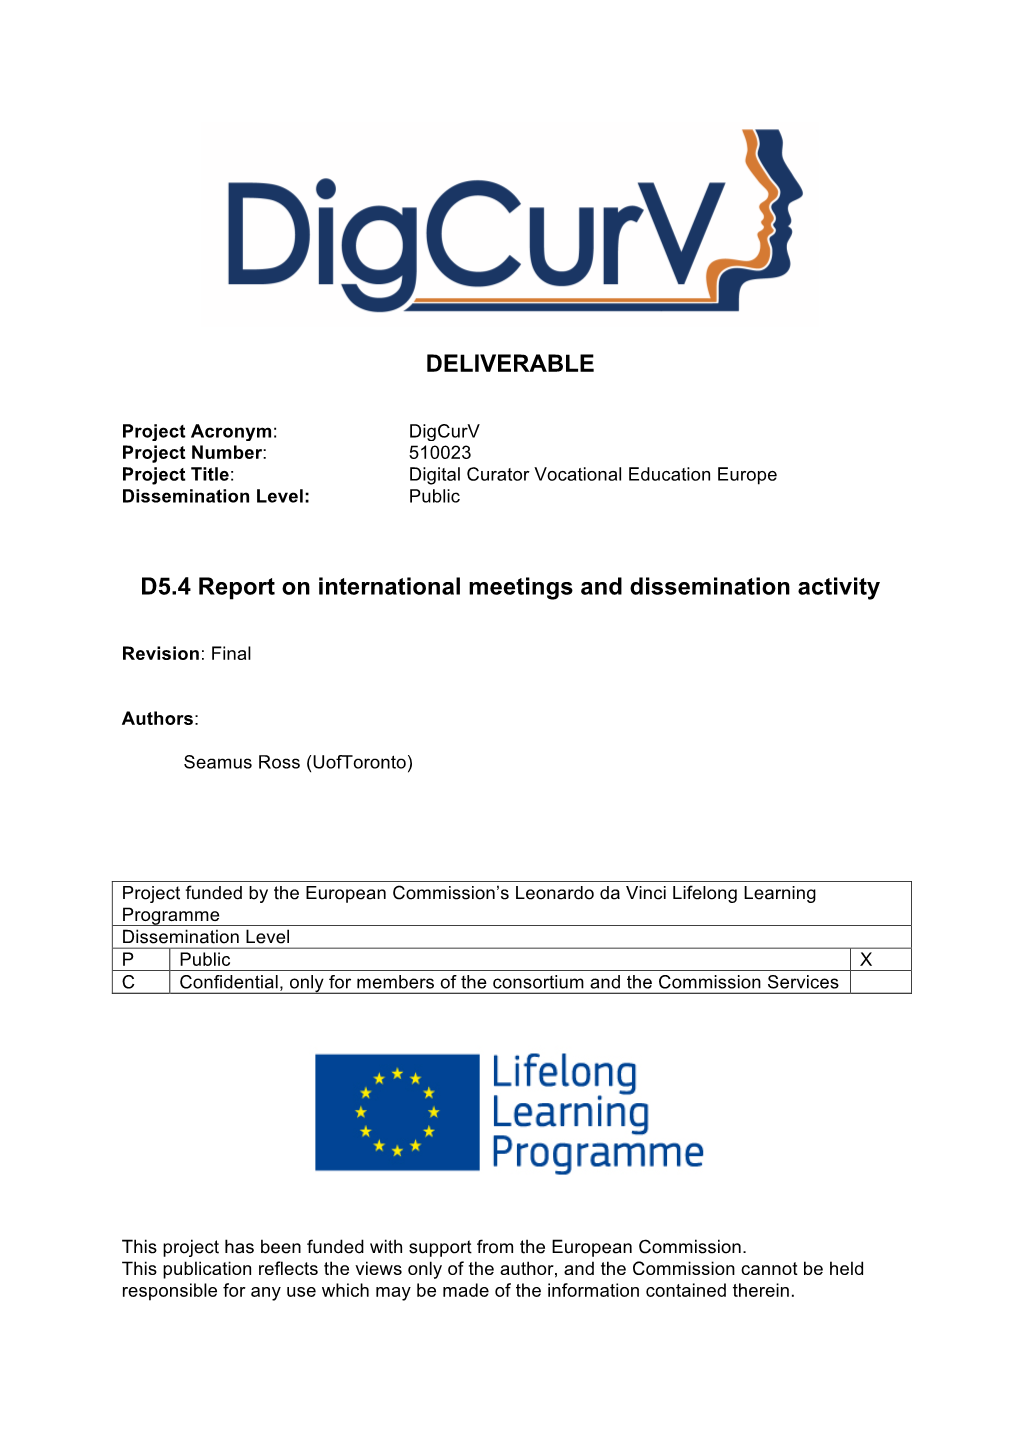 DELIVERABLE D5.4 Report on International Meetings And